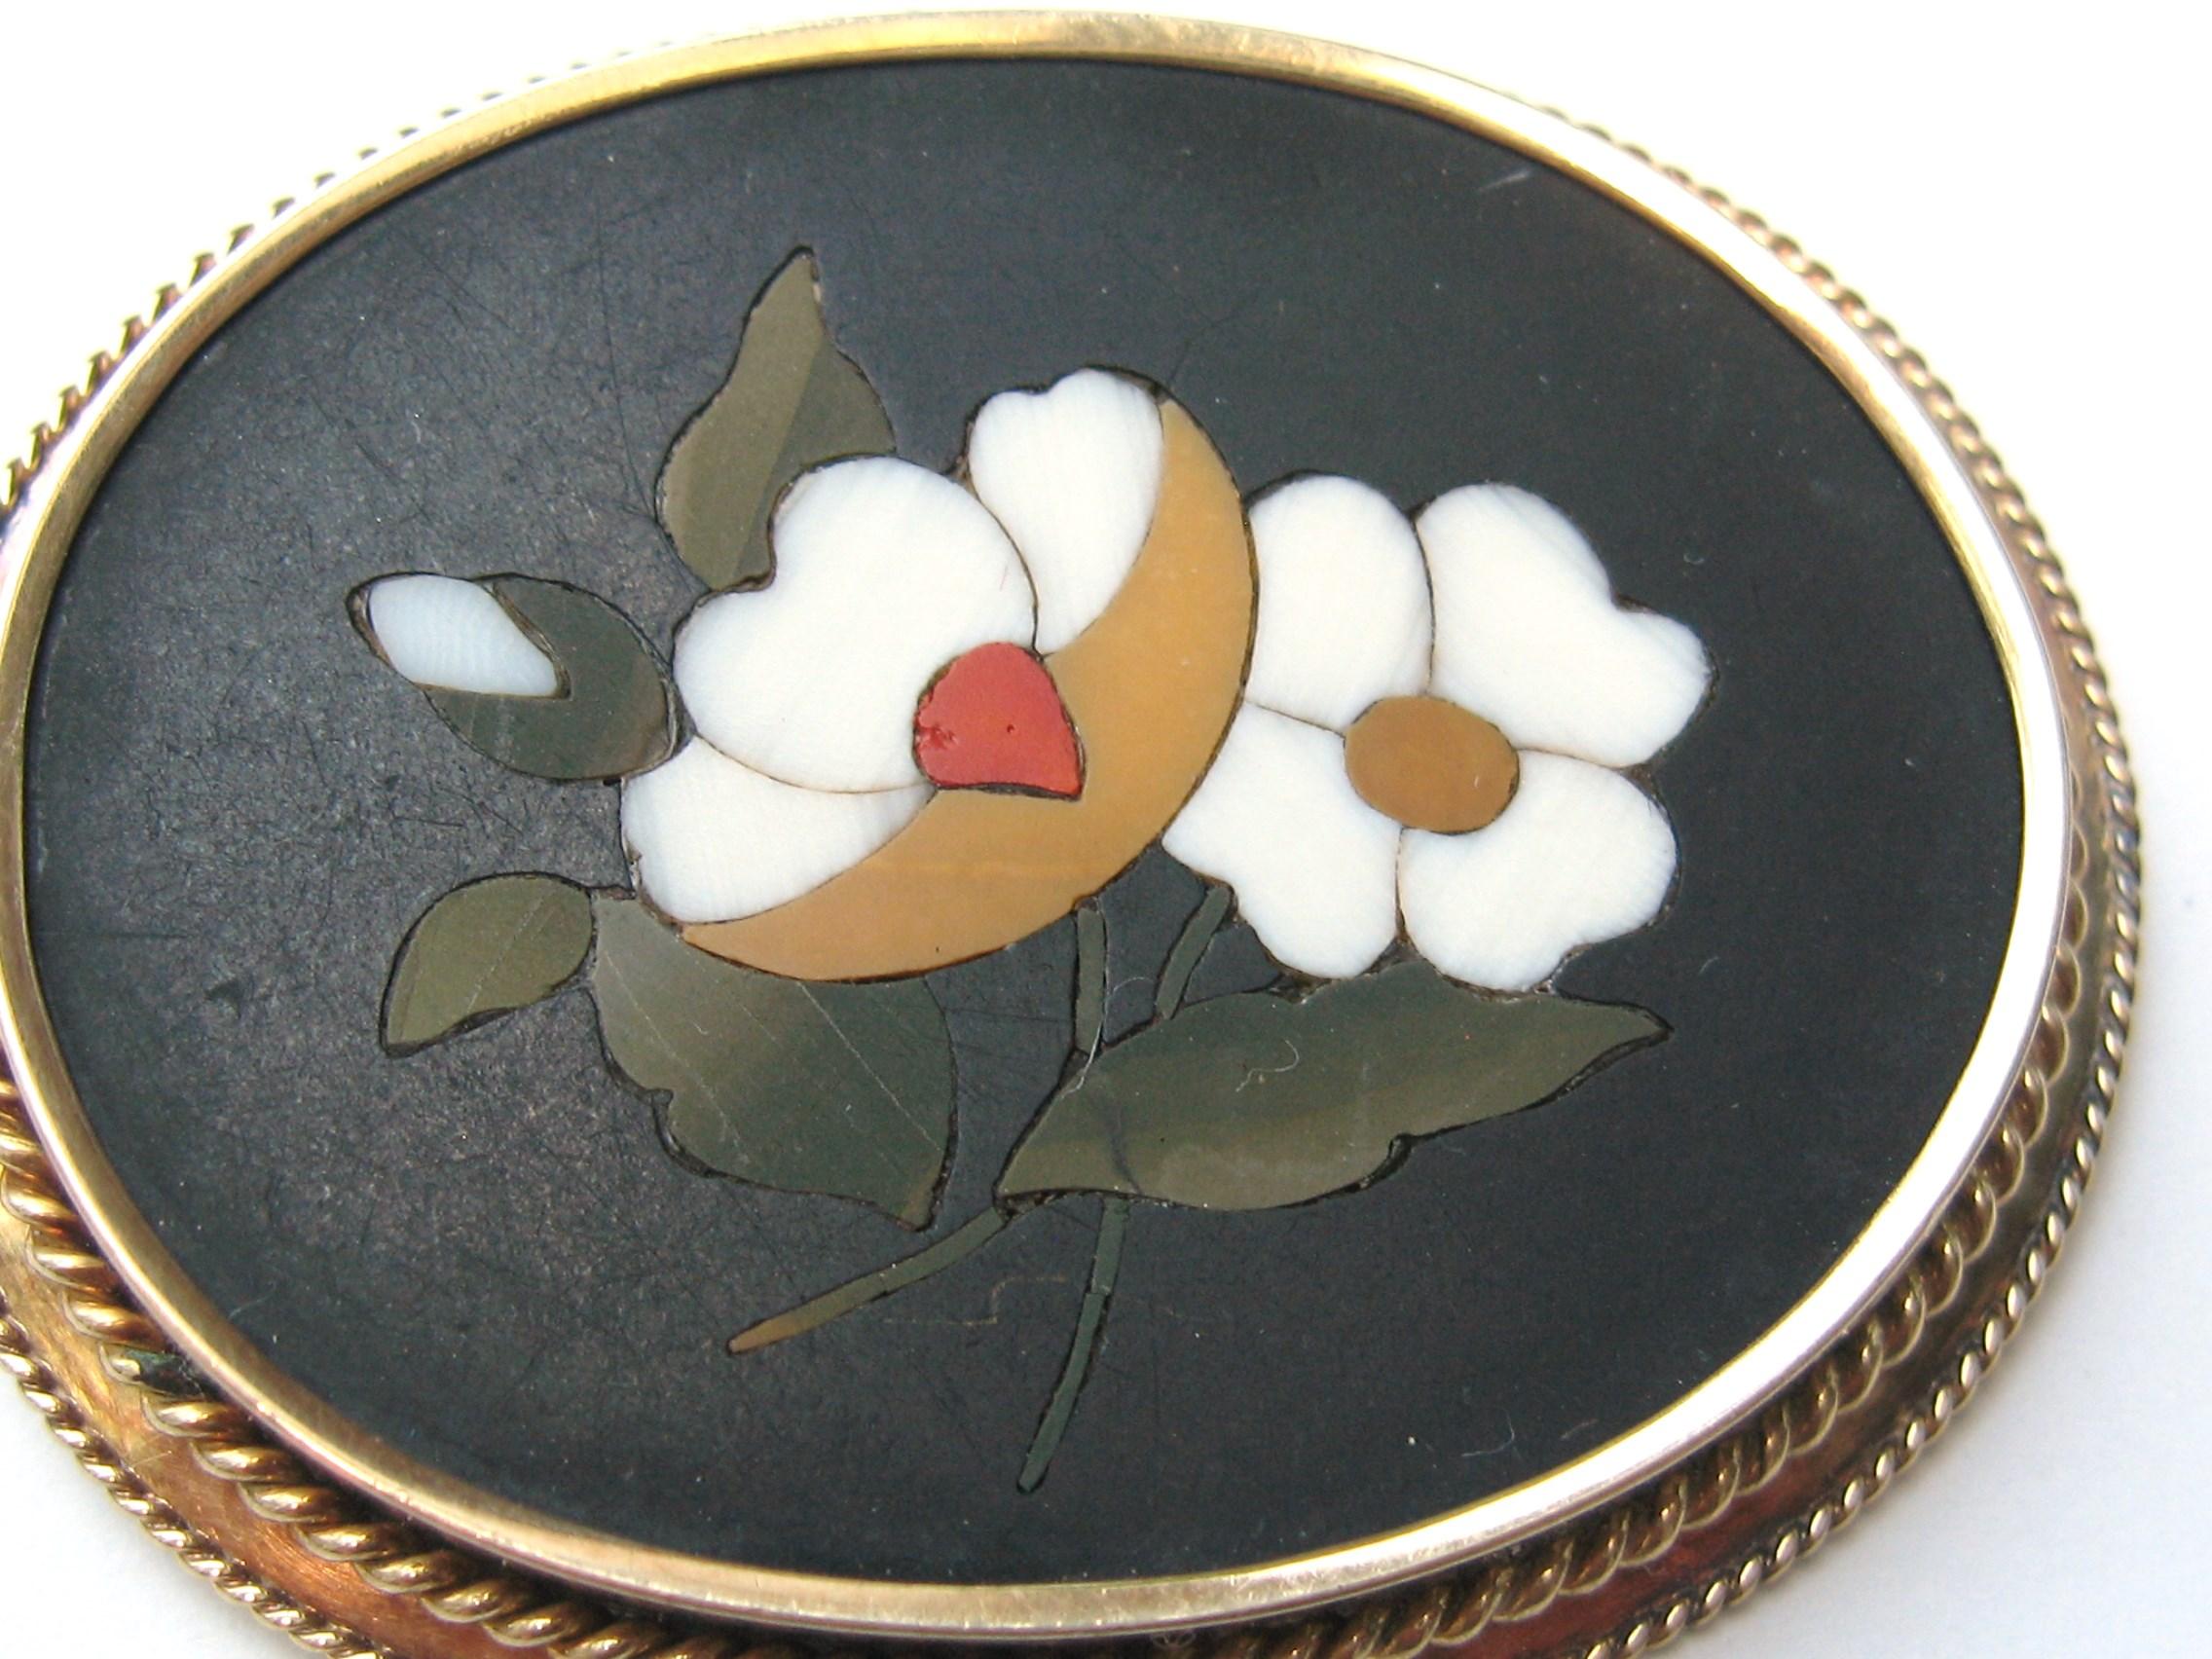 A wonderful antique Victorian Circa 1890s Italian Pietra Dura Floral Mourning Brooch featuring a mosaic floral inlay set in 14k gold / onyx. Measuring 1.86